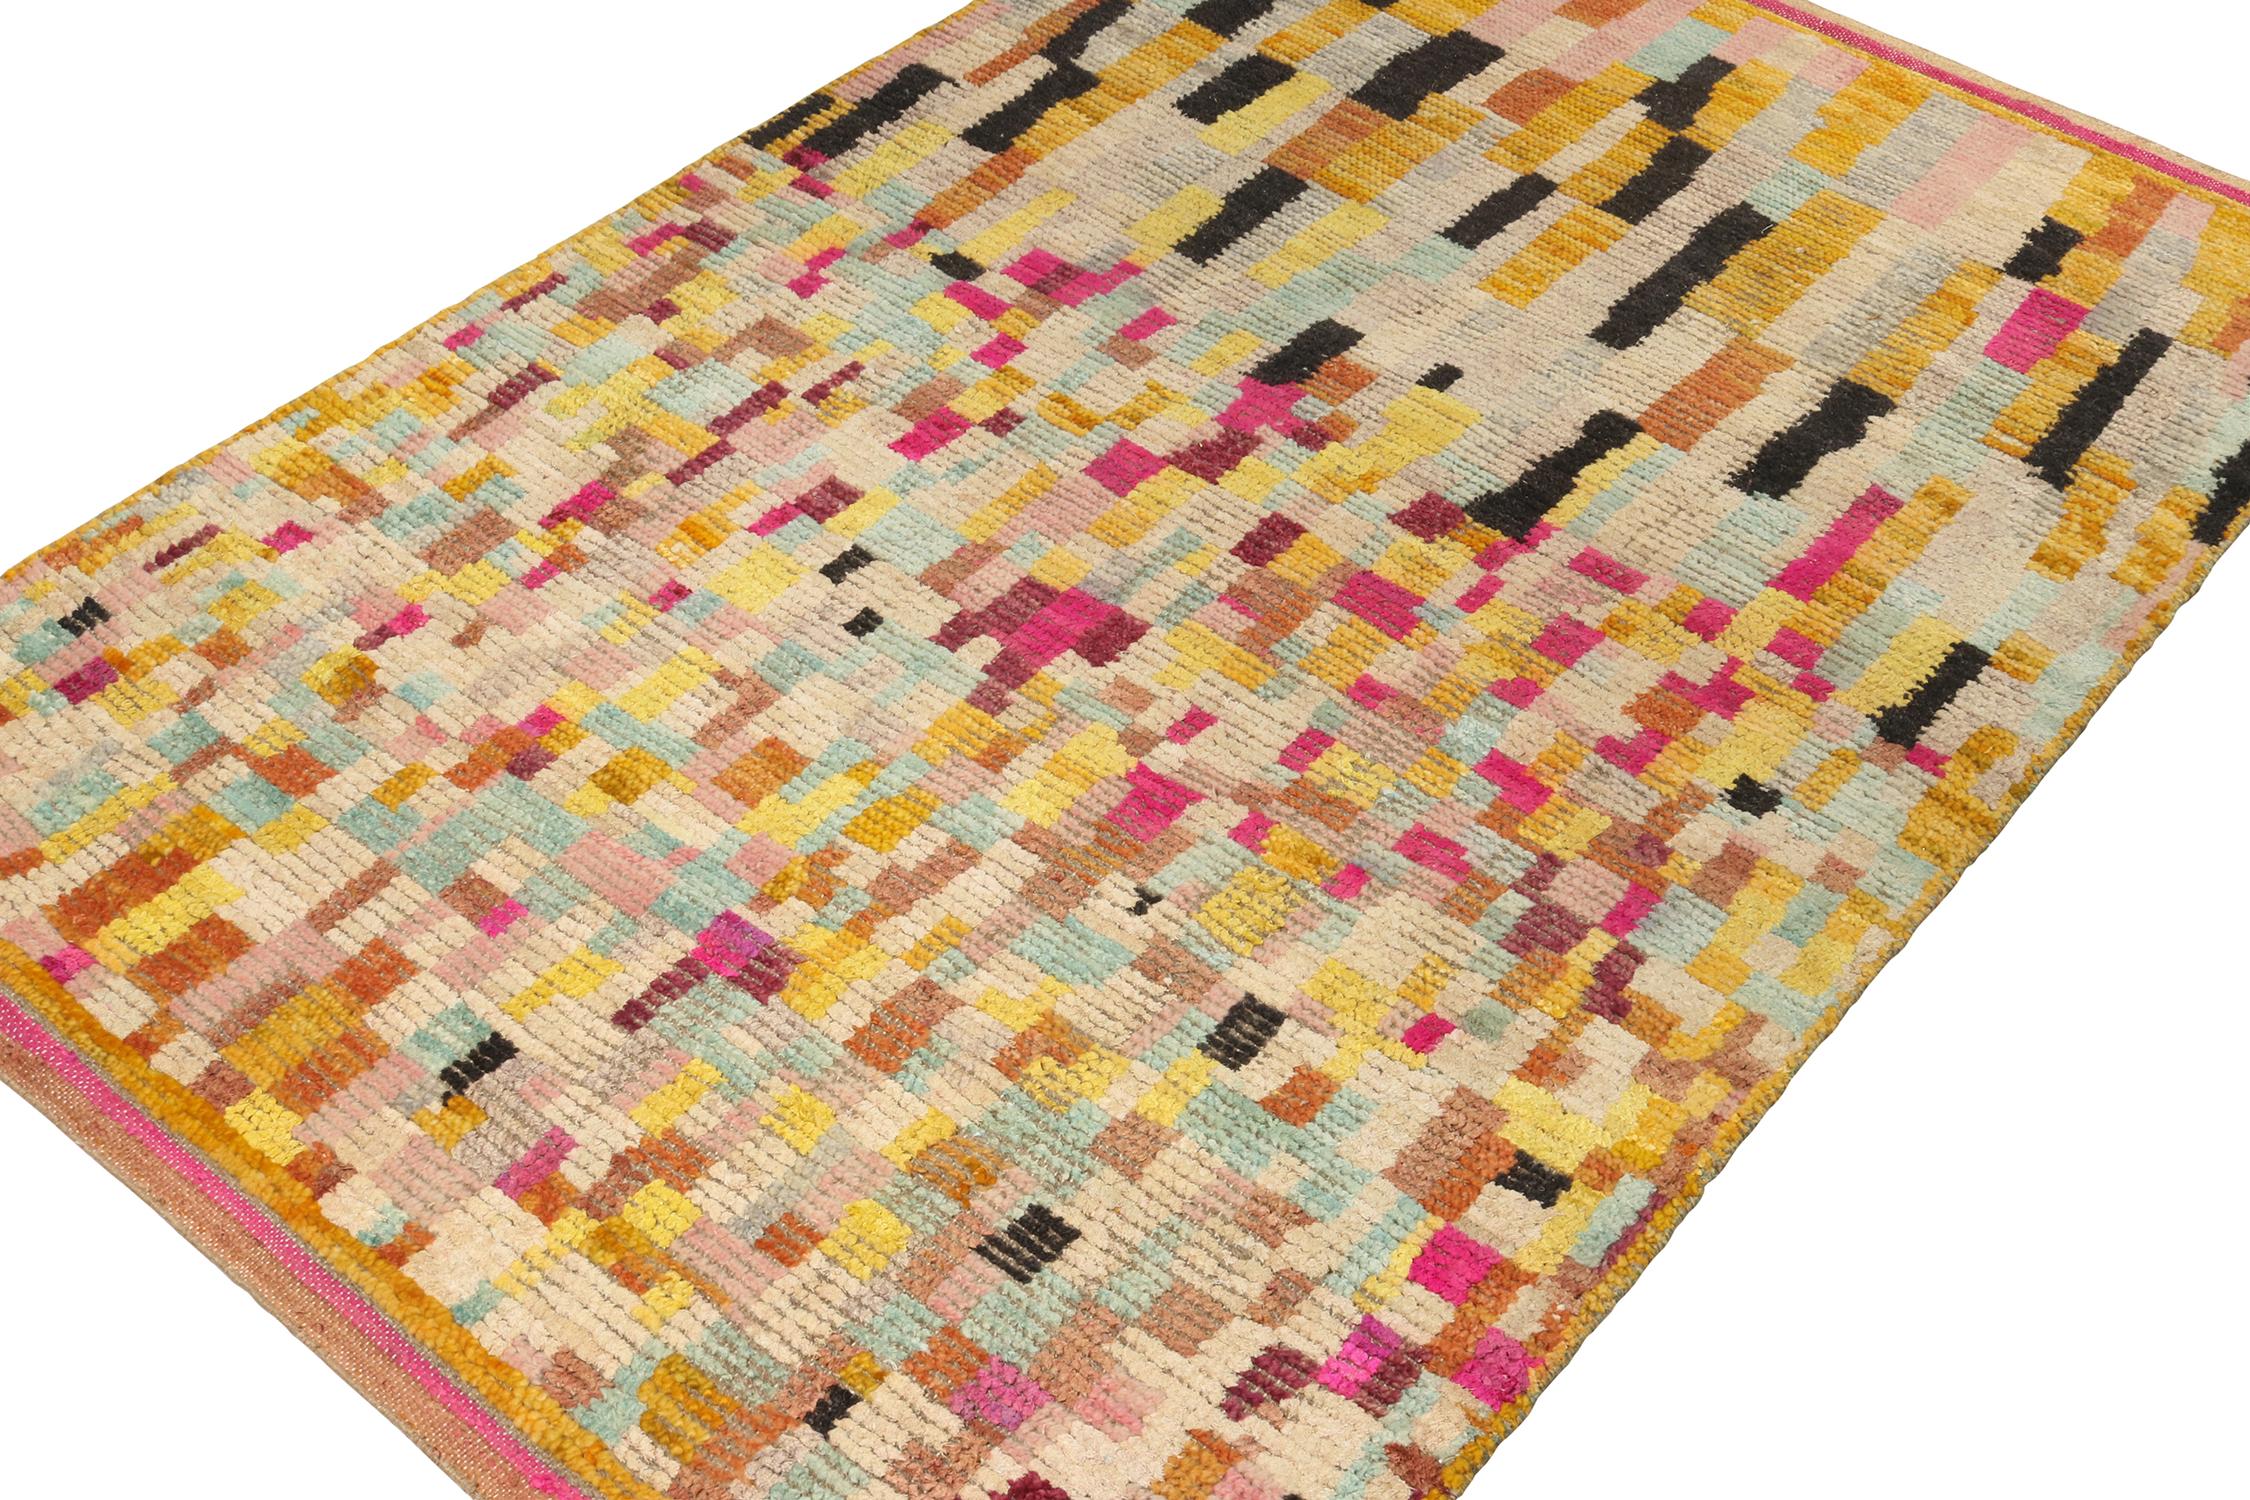 This contemporary 4x6 rug is the newest entry to Rug & Kilim's new Moroccan Collection—a bold take on the iconic style. Hand-knotted in a blend of wool, silk, and cotton.
Further on the design:
The design takes inspiration from playful textural